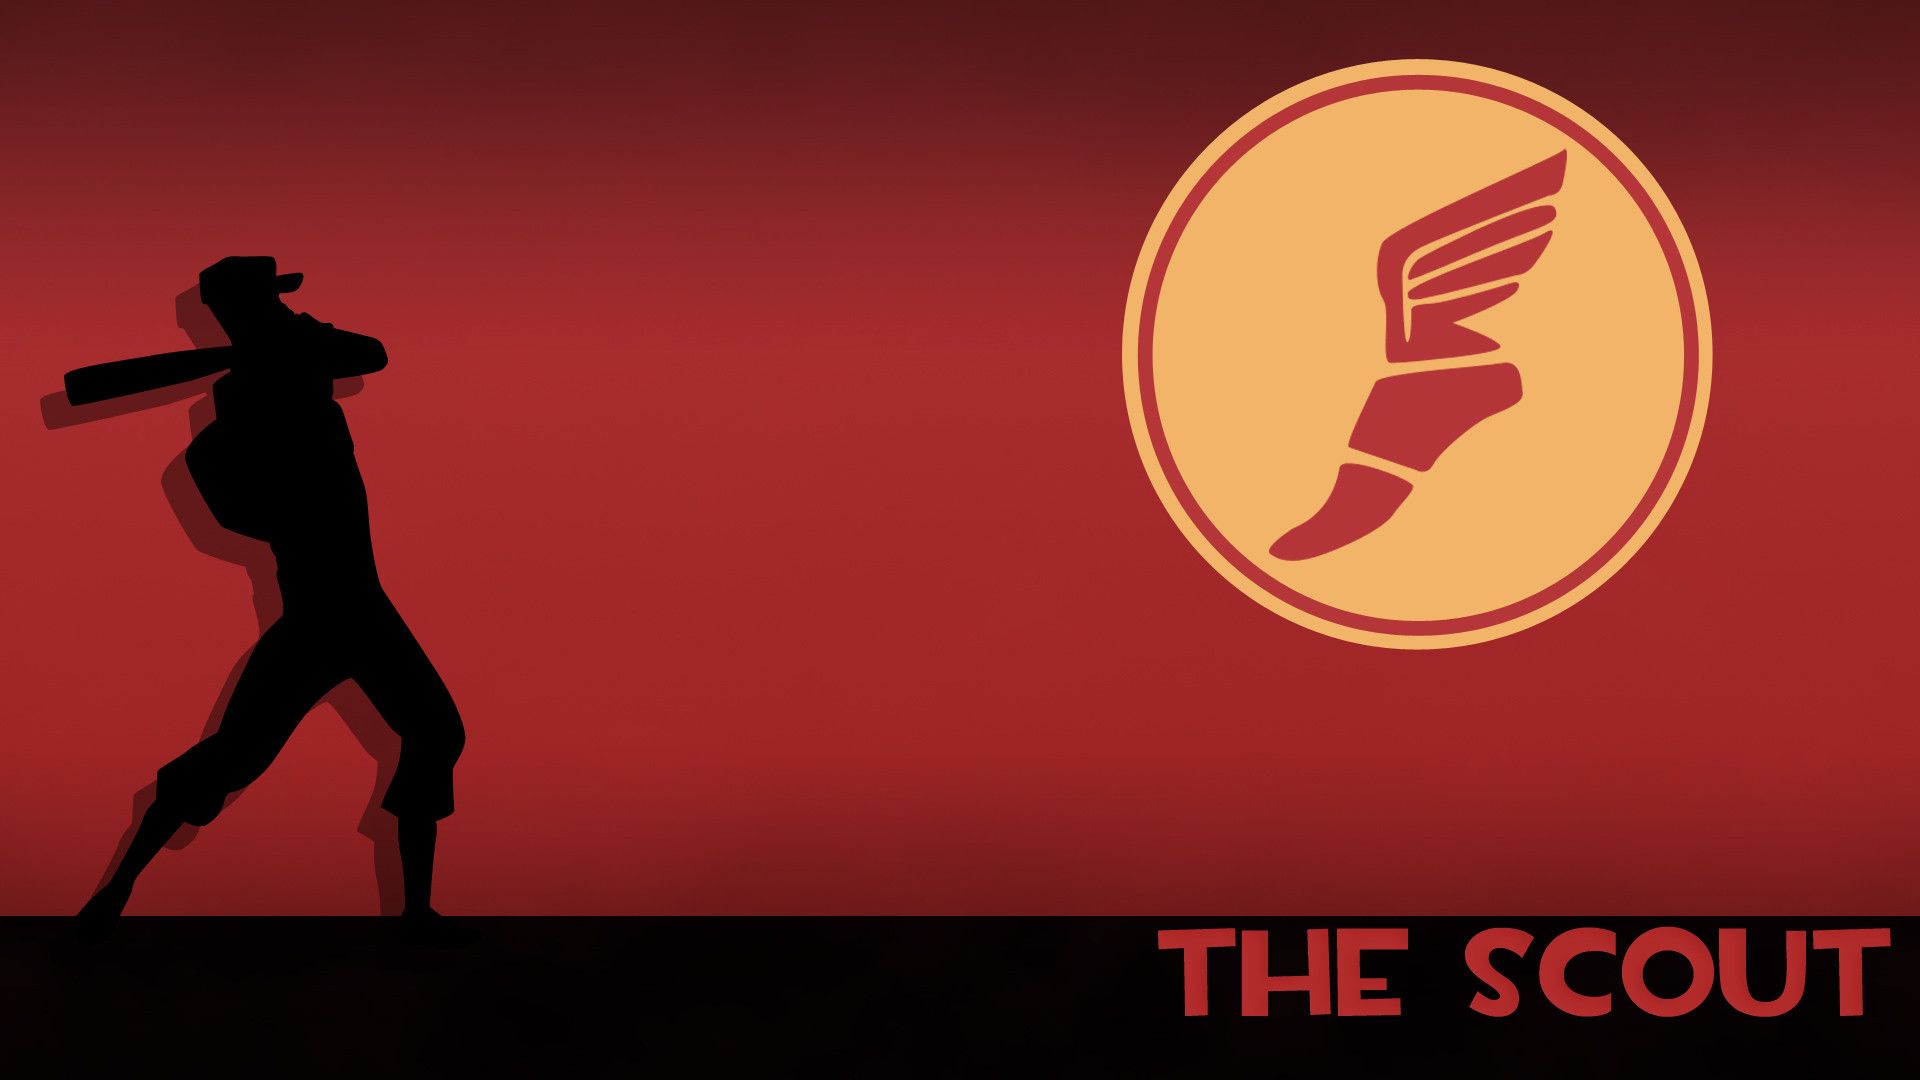 Tf2 Spy Wallpapers - Wallpaper Cave